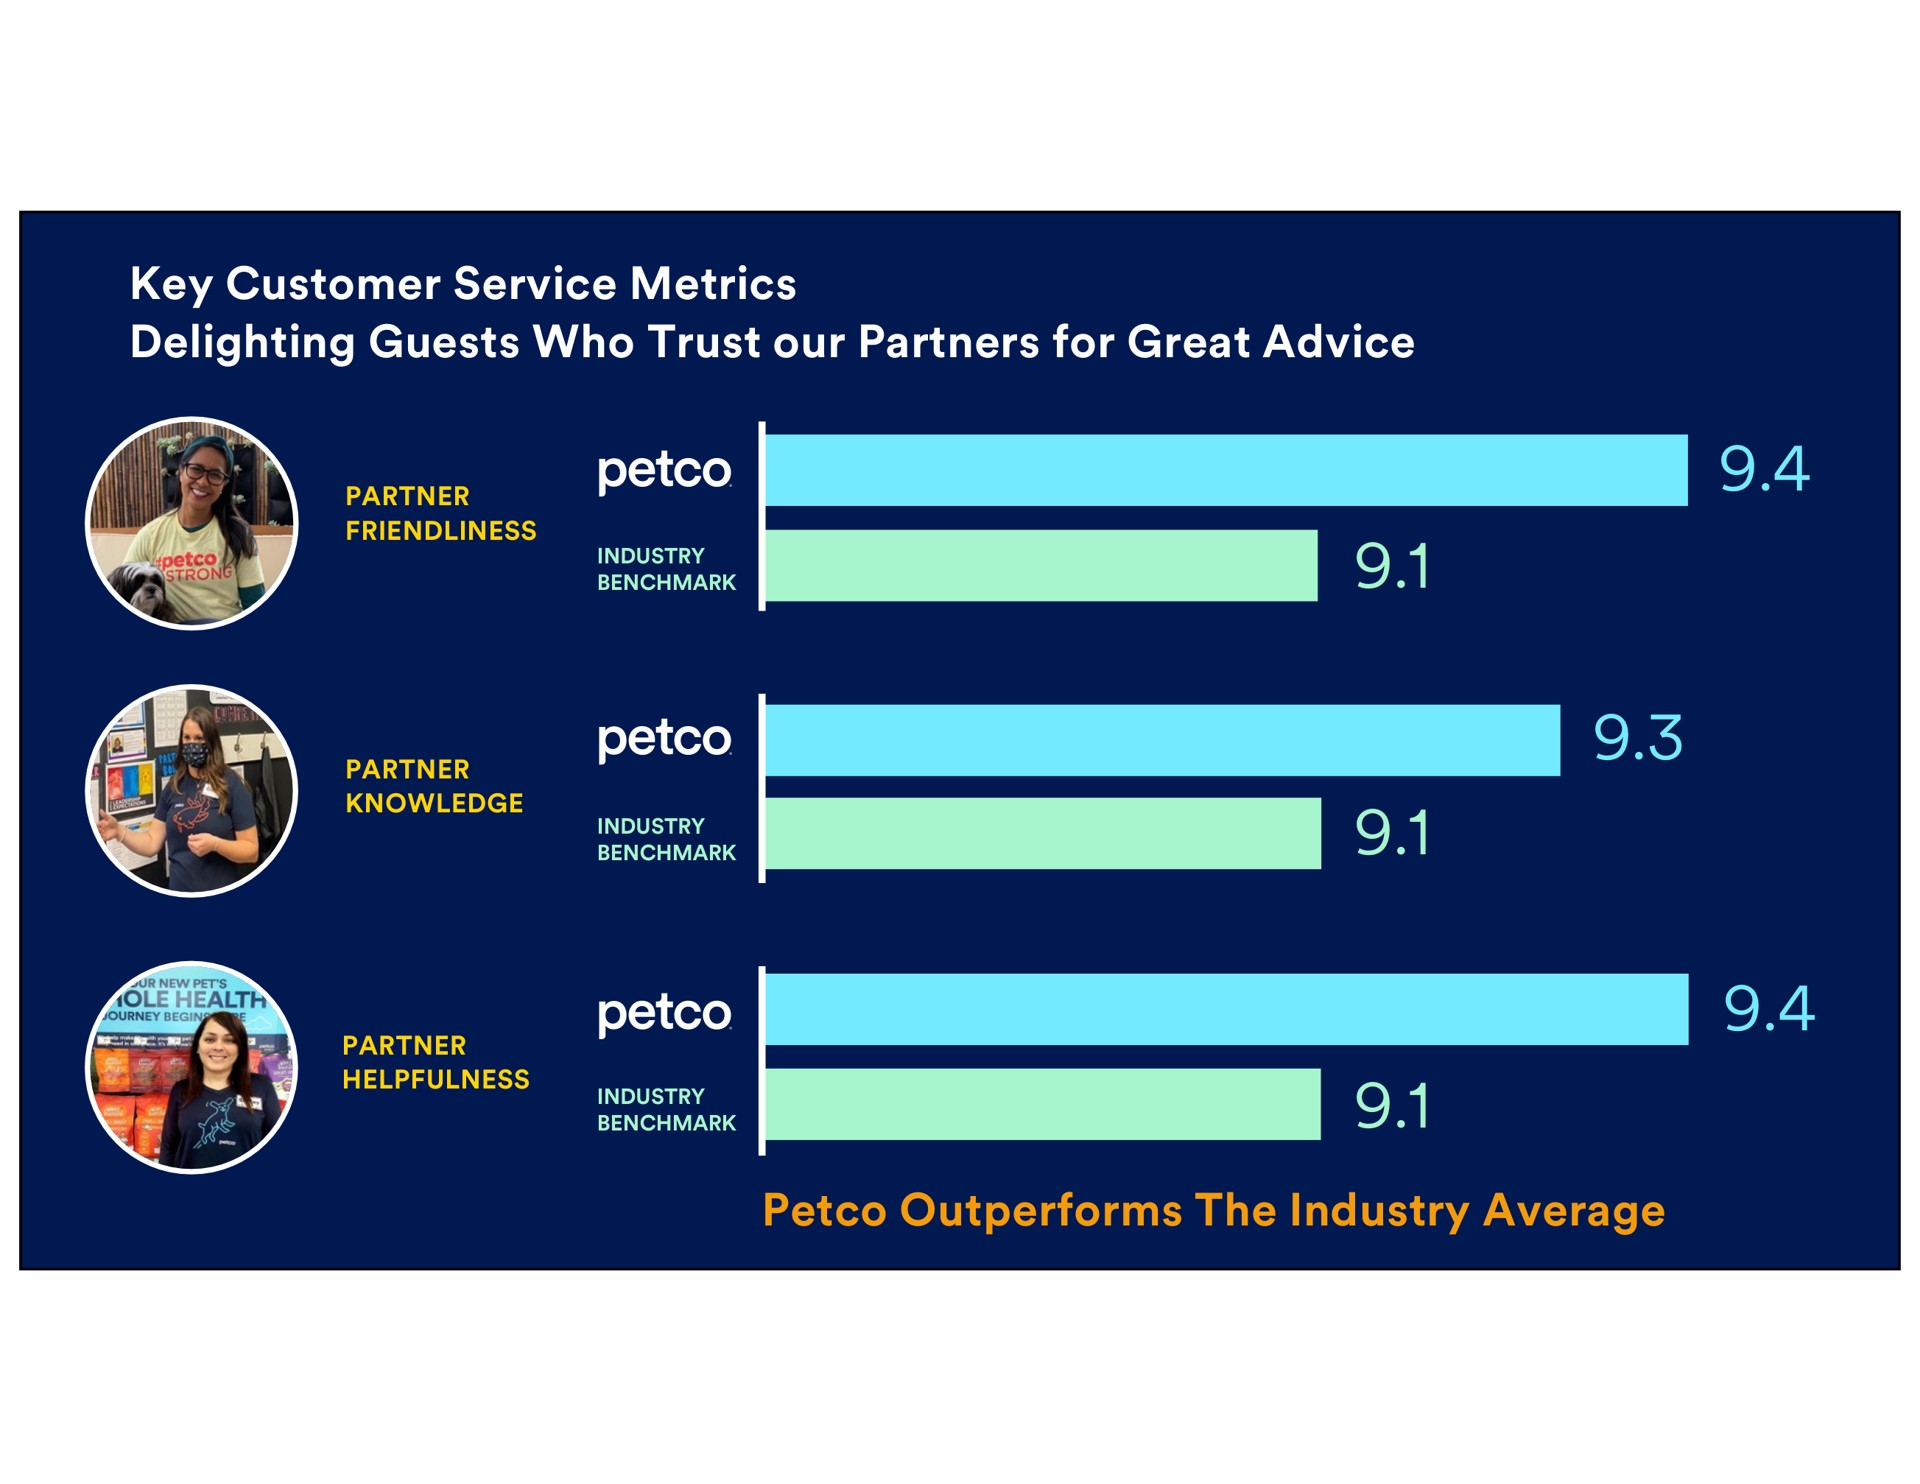 key customer service metrics key customer service metrics delighting guests who trust our partners for great advice outperforms the industry average partner friendliness partner knowledge partner helpfulness | Petco